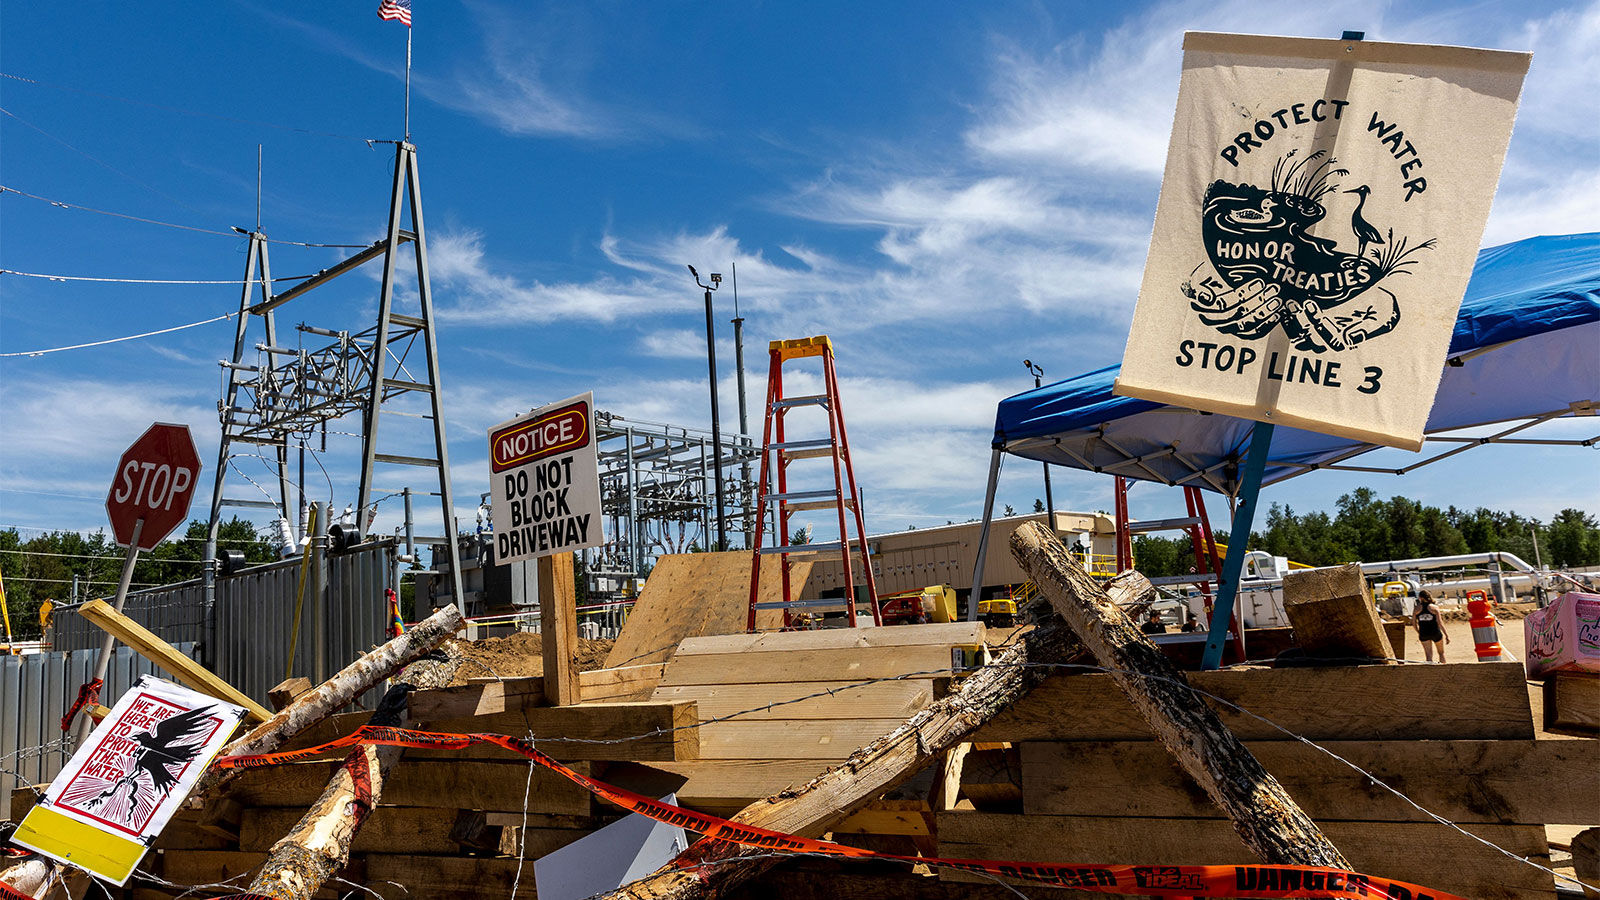 Protest signs in front of machinery and materials at the site of the Line 3 pipeline